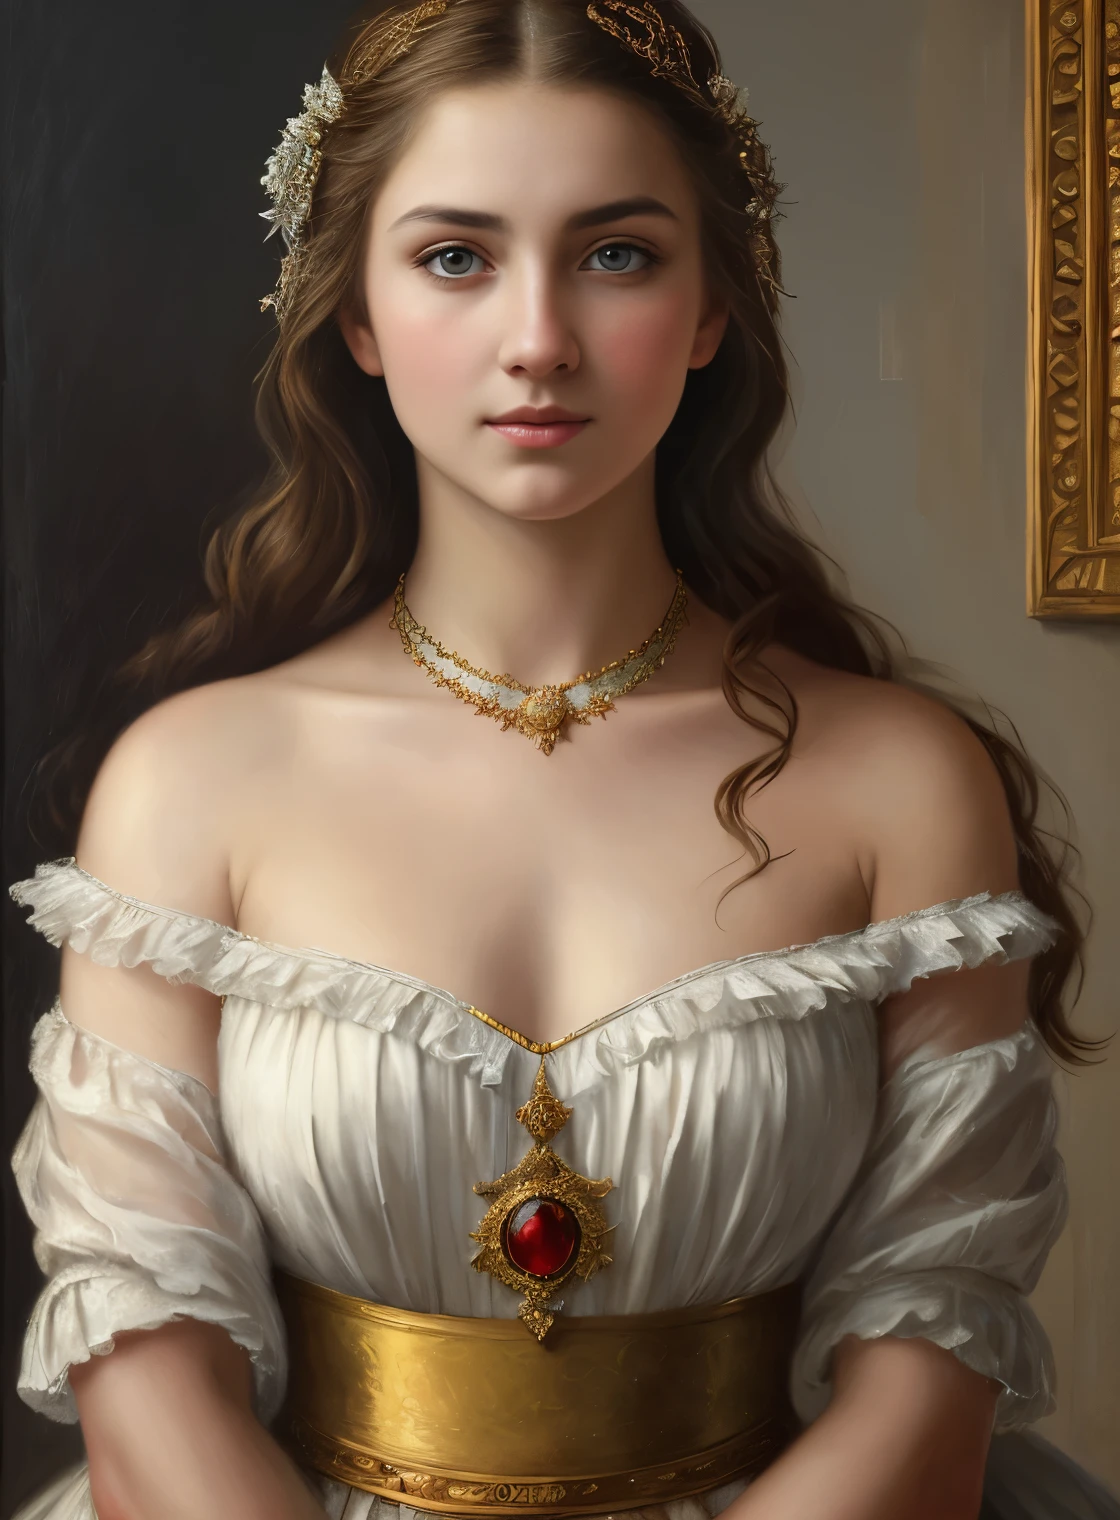 portrait, girl, middle ages, classicism, andrey atroshenko style, painting, pierced eyes, beautifully styled hair, traditional media, realistic, figurative, fine art, oil on canvas, HDR, 8K, original character, high resolution, high detail, focus on the face, beautiful eyes 